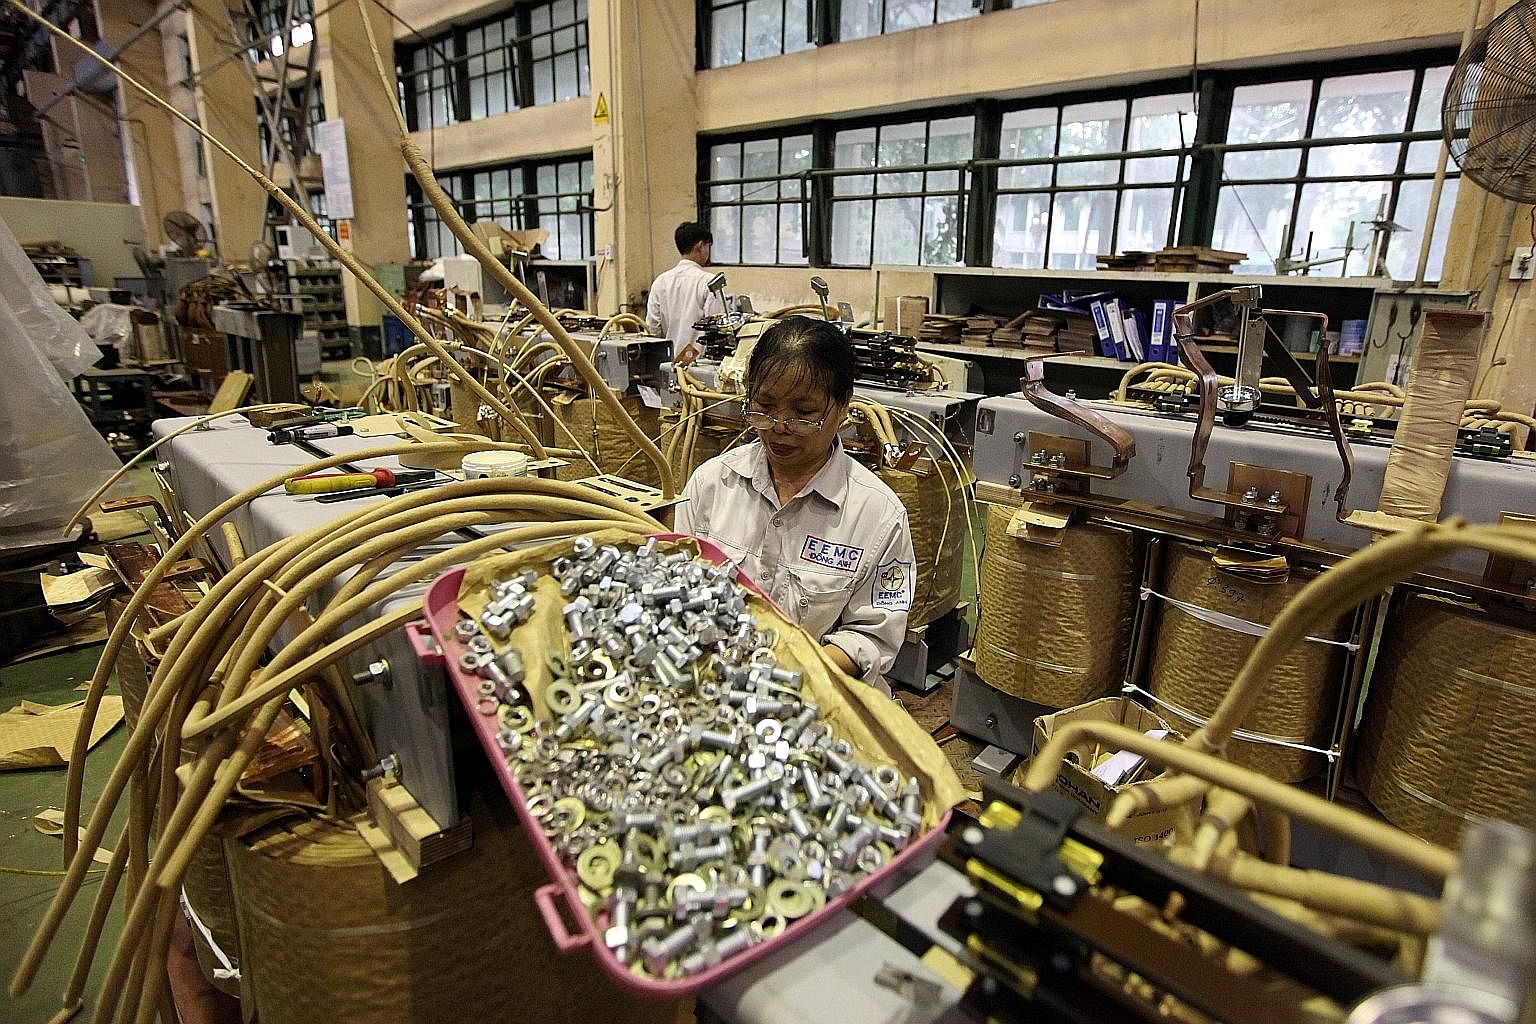 Workers in a transformer manufacturing workshop in Hanoi. Vietnam's manufacturing and export sector has traditionally focused on the US and European markets.